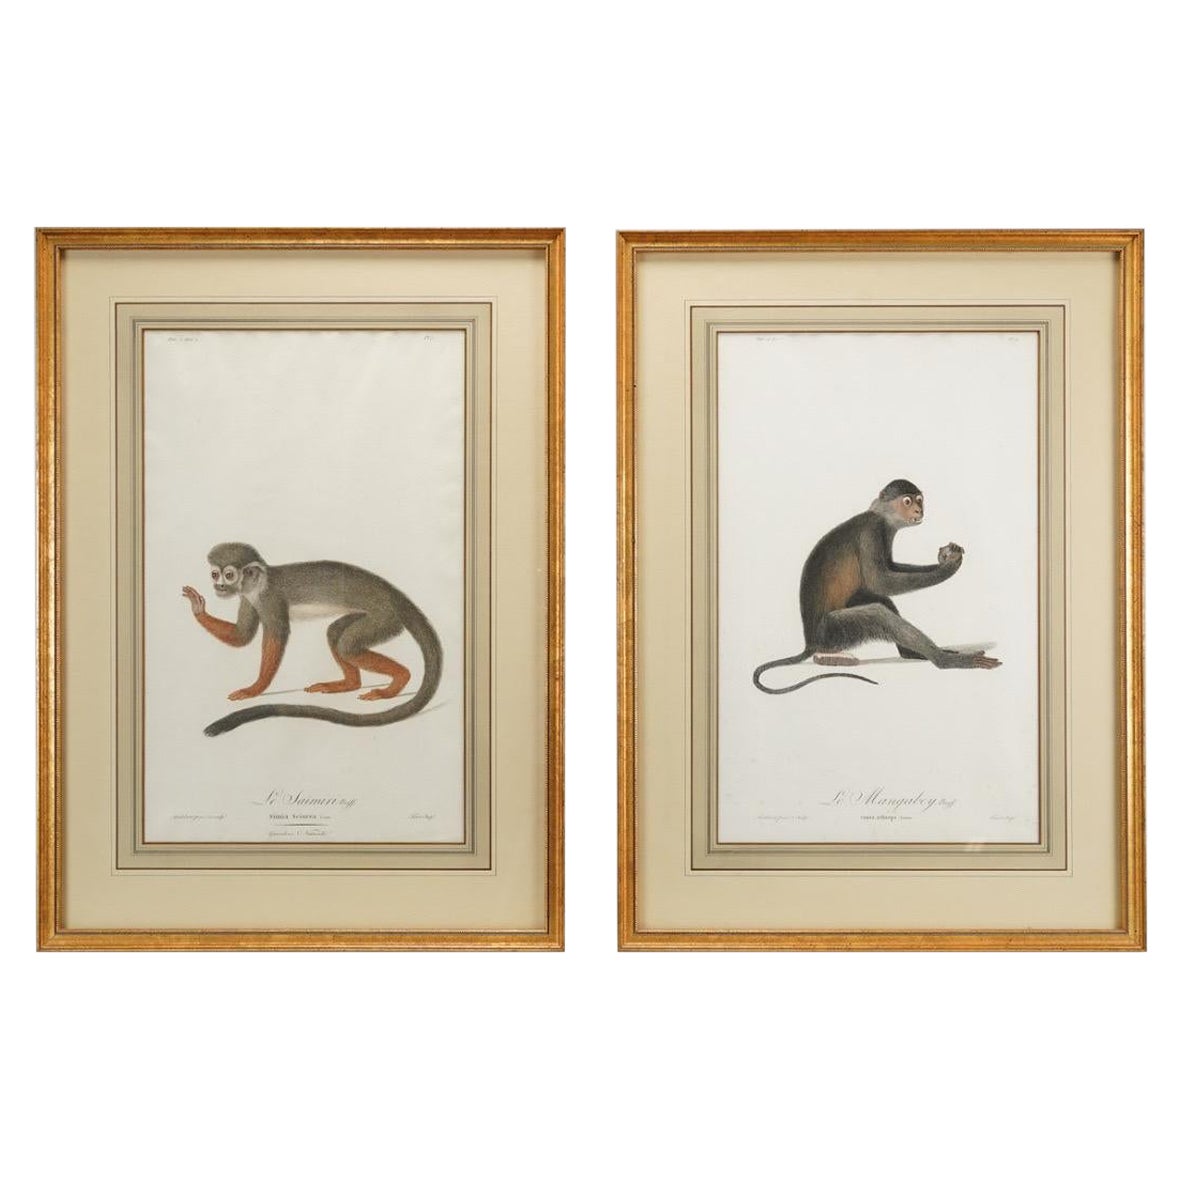 Buffon Natural History Pair of Framed Original 18thC Hand Colored Monkey Prints For Sale